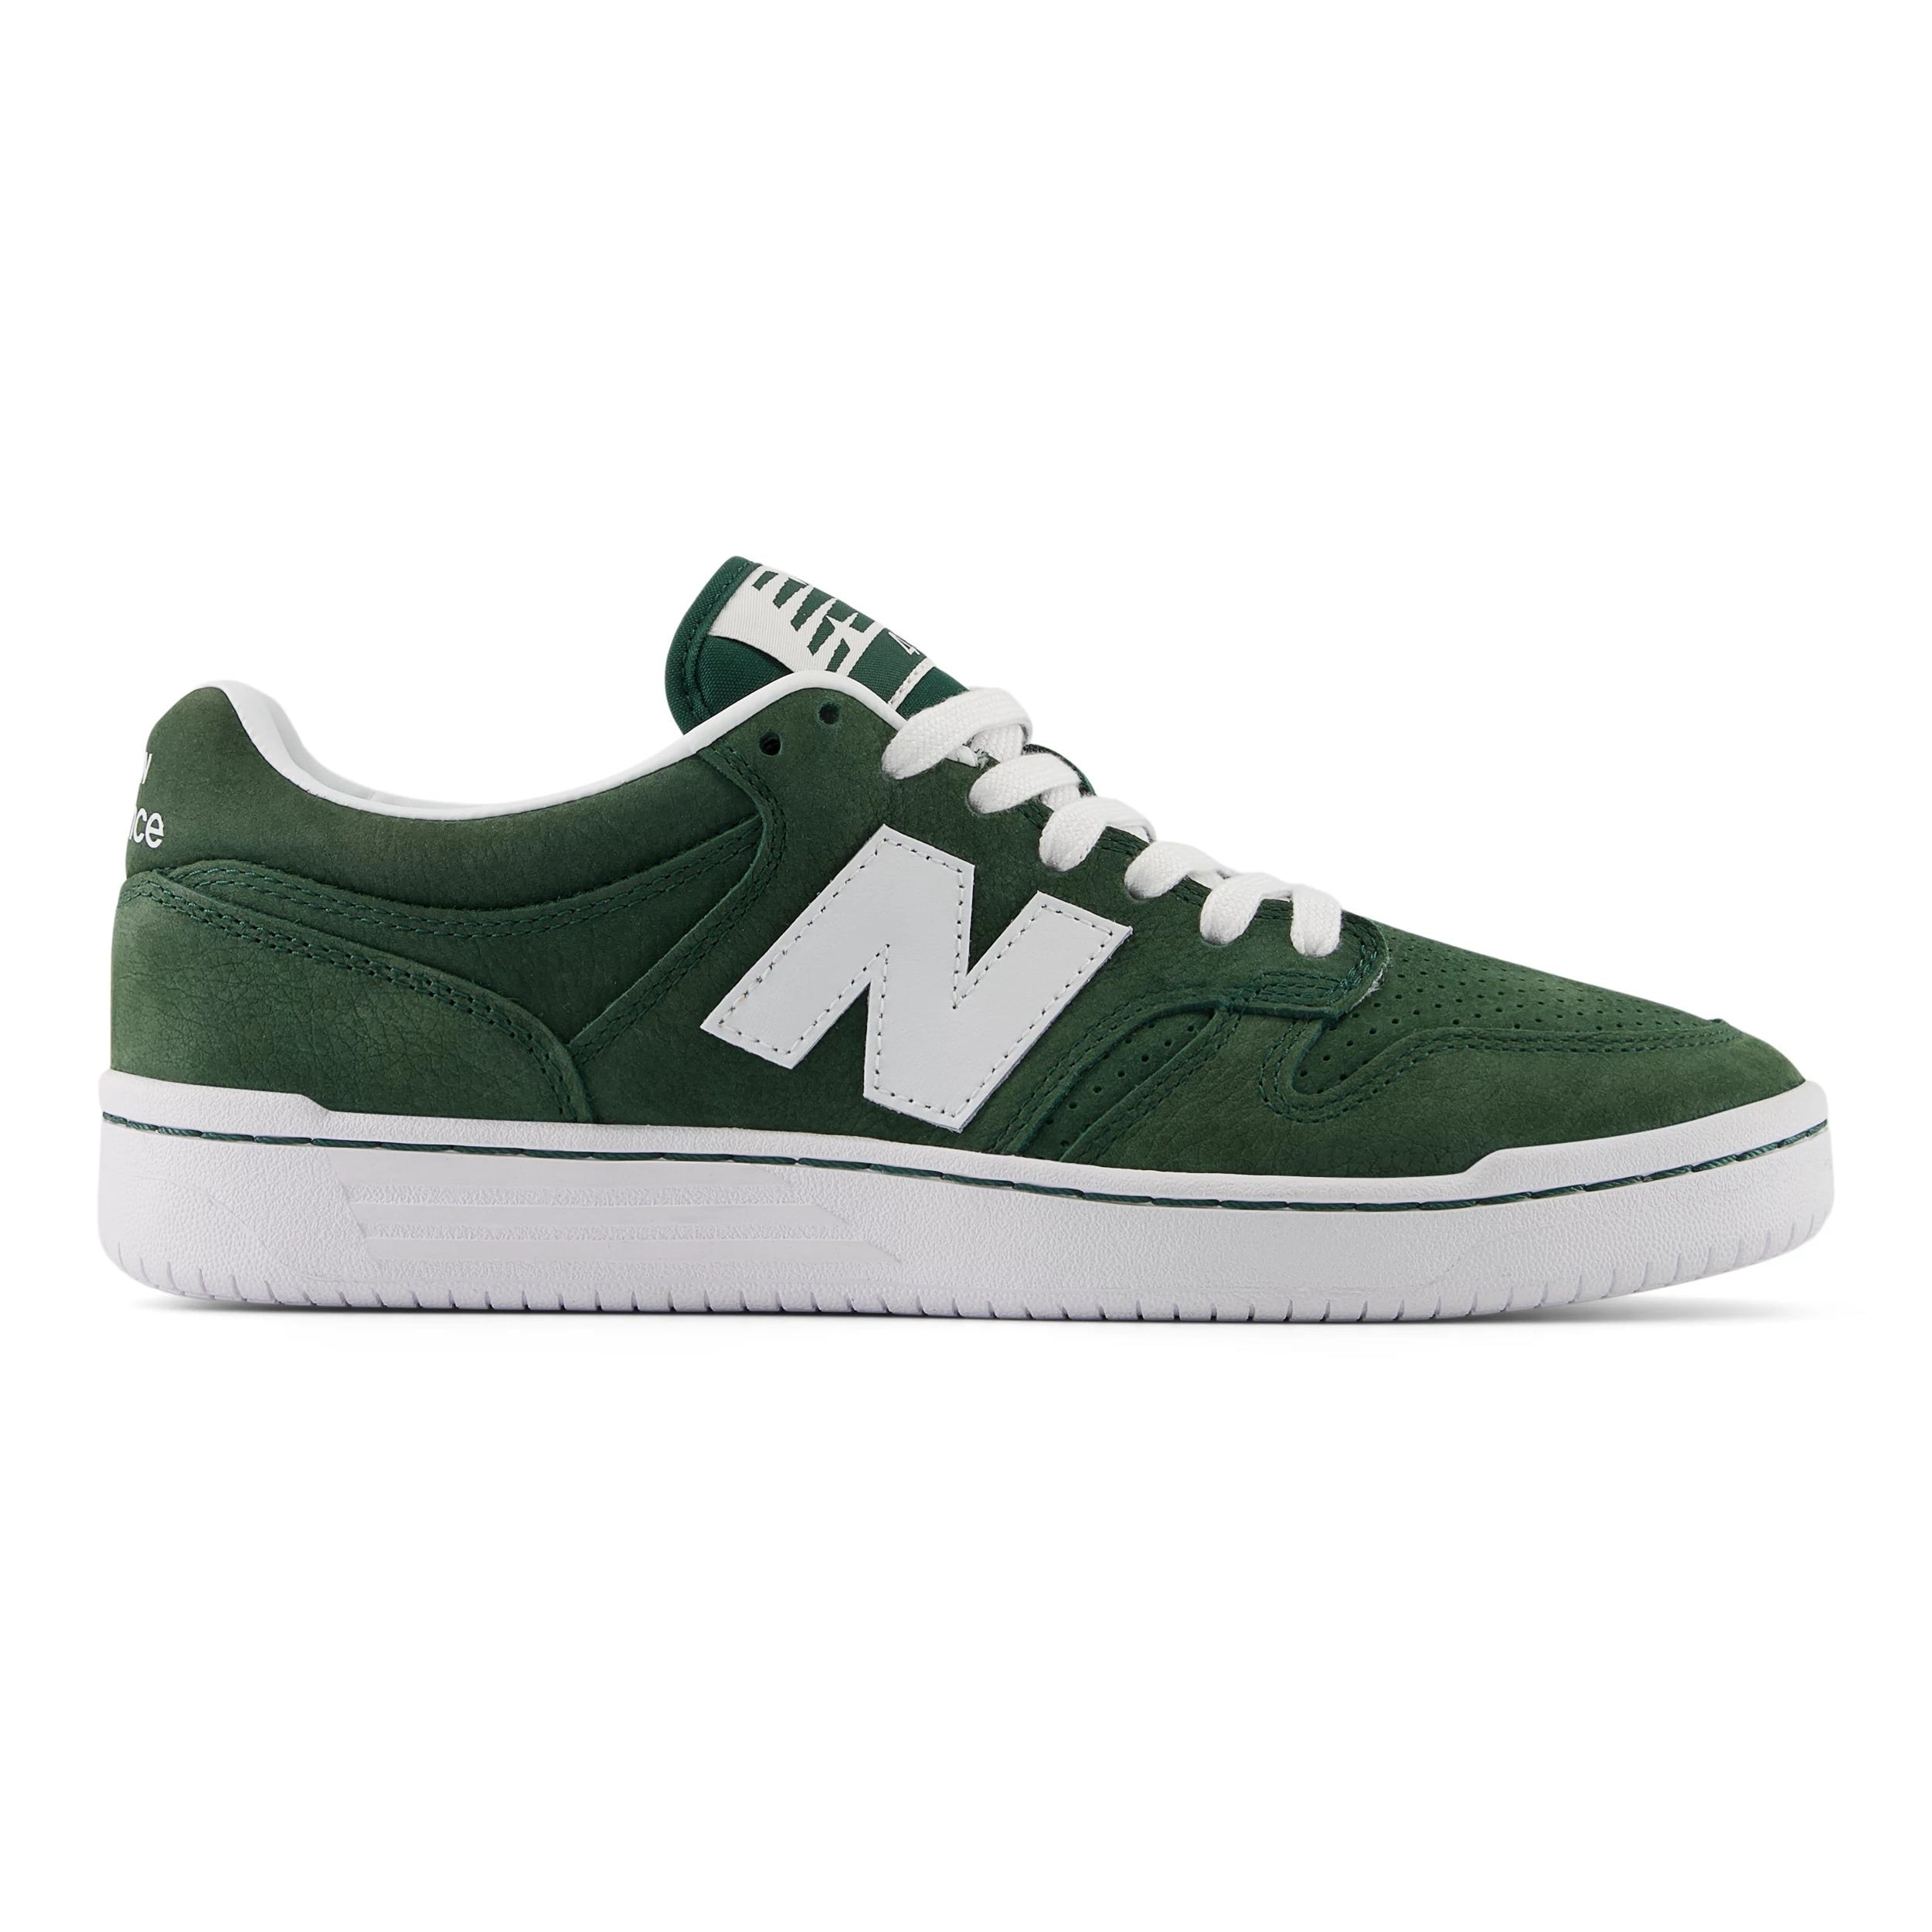 Forest Green 480 NB Numeric Skate Shoe